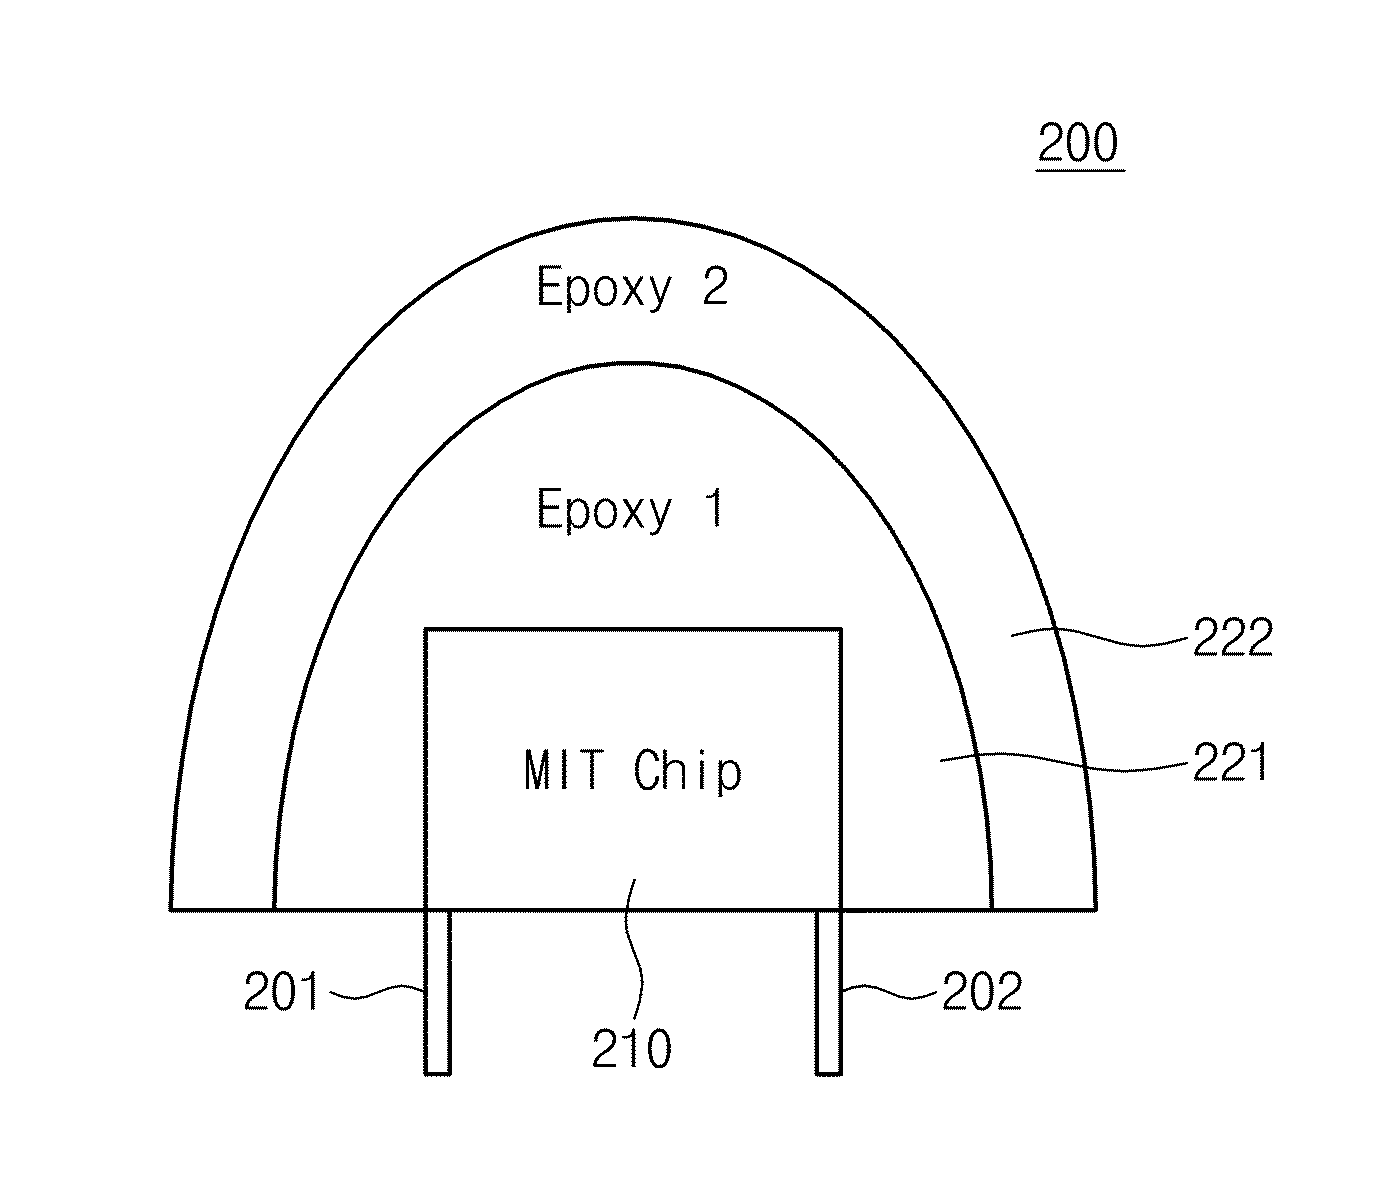 Metal-insulator transition (MIT) device molded by clear compound epoxy and fire detecting device including the mit device